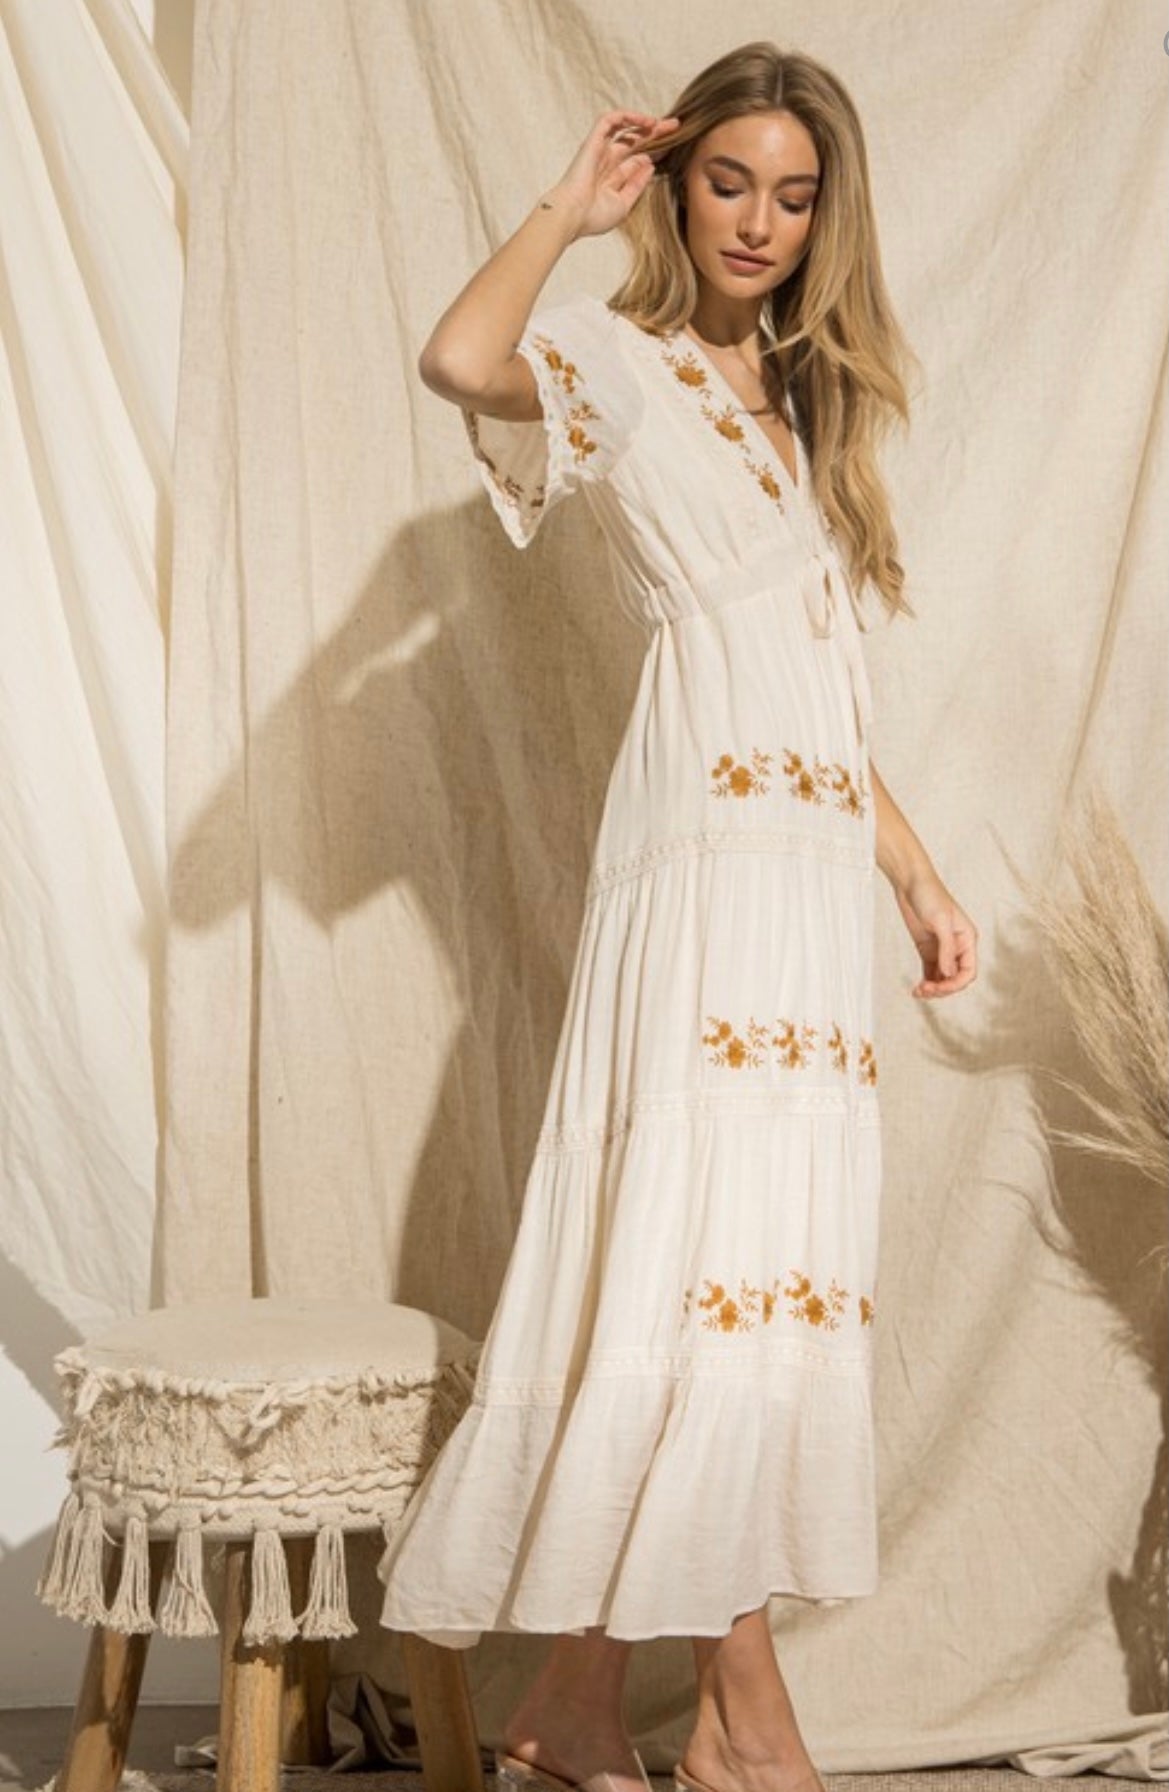 Simply Spotted Floral Embroidered Dress In Ivory Rust